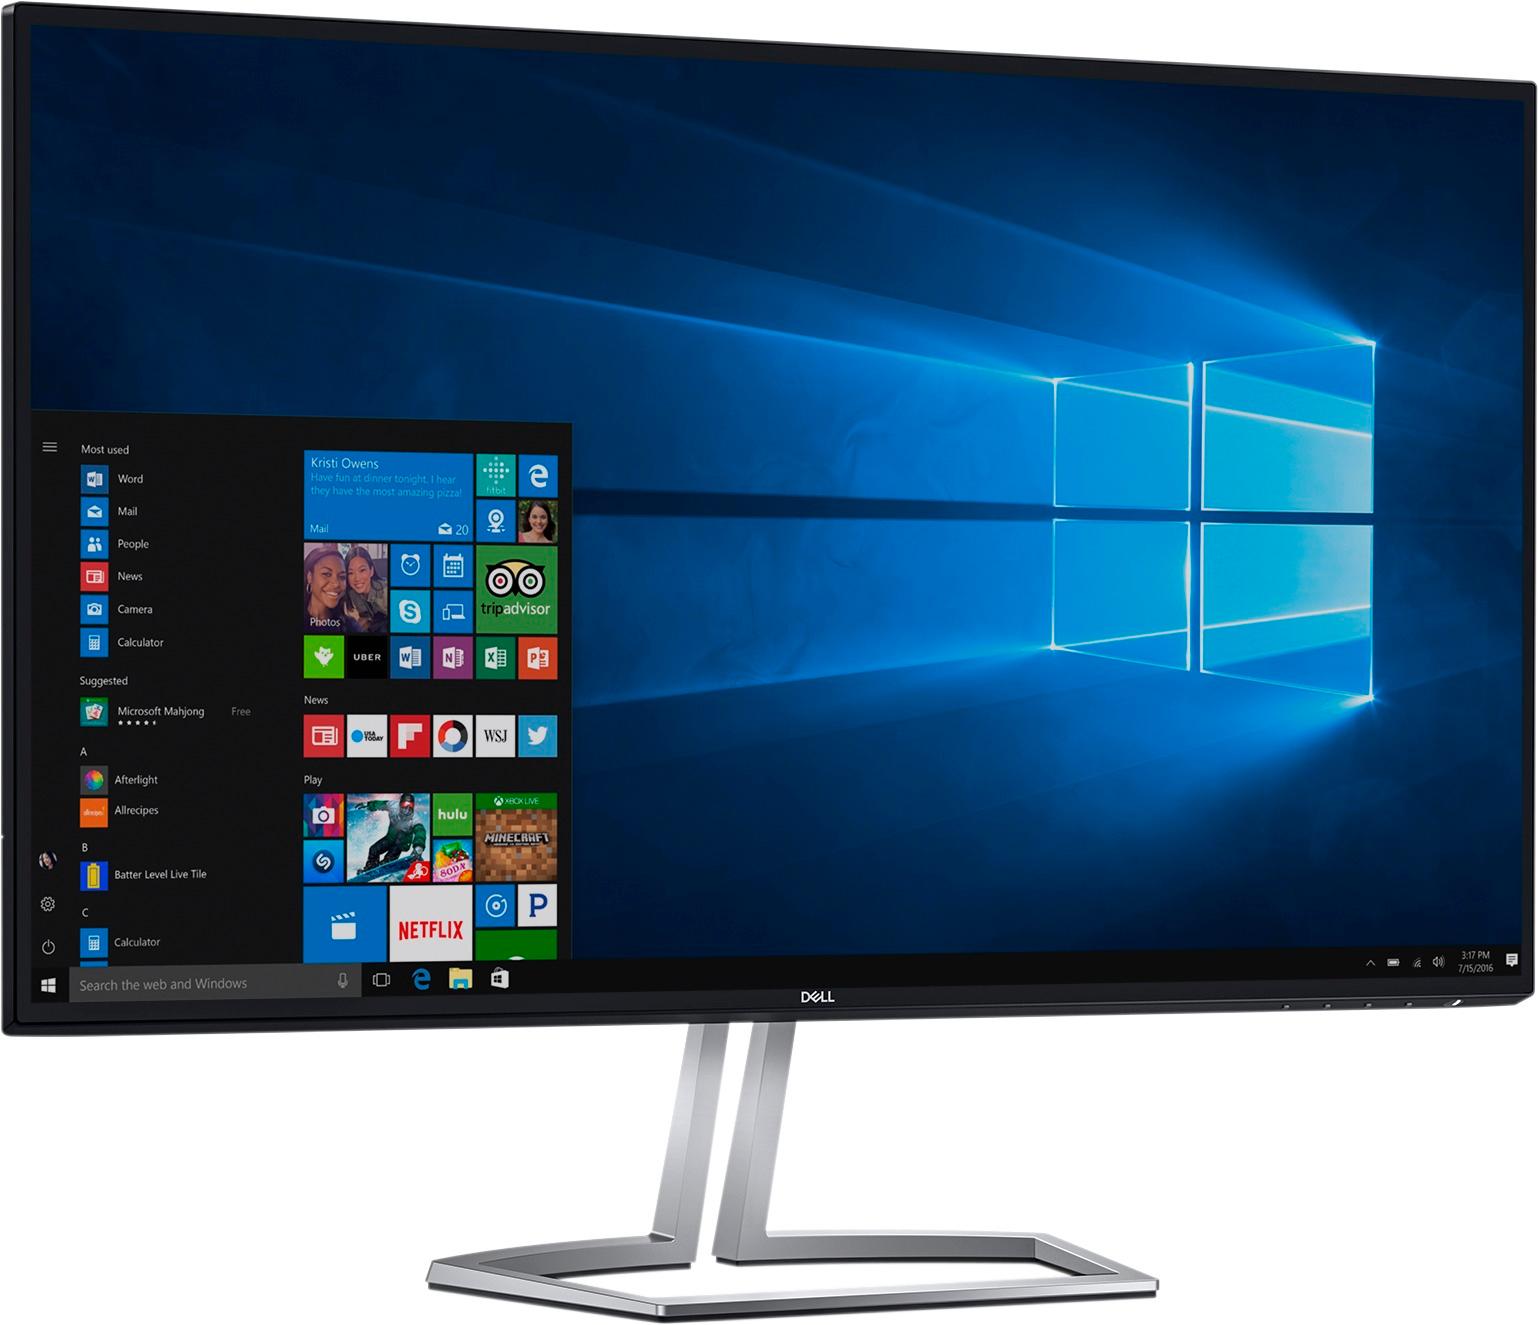 Best Buy: Dell 27 IPS LED QHD Monitor with HDR (HDMI) Black/Silver S2719DM